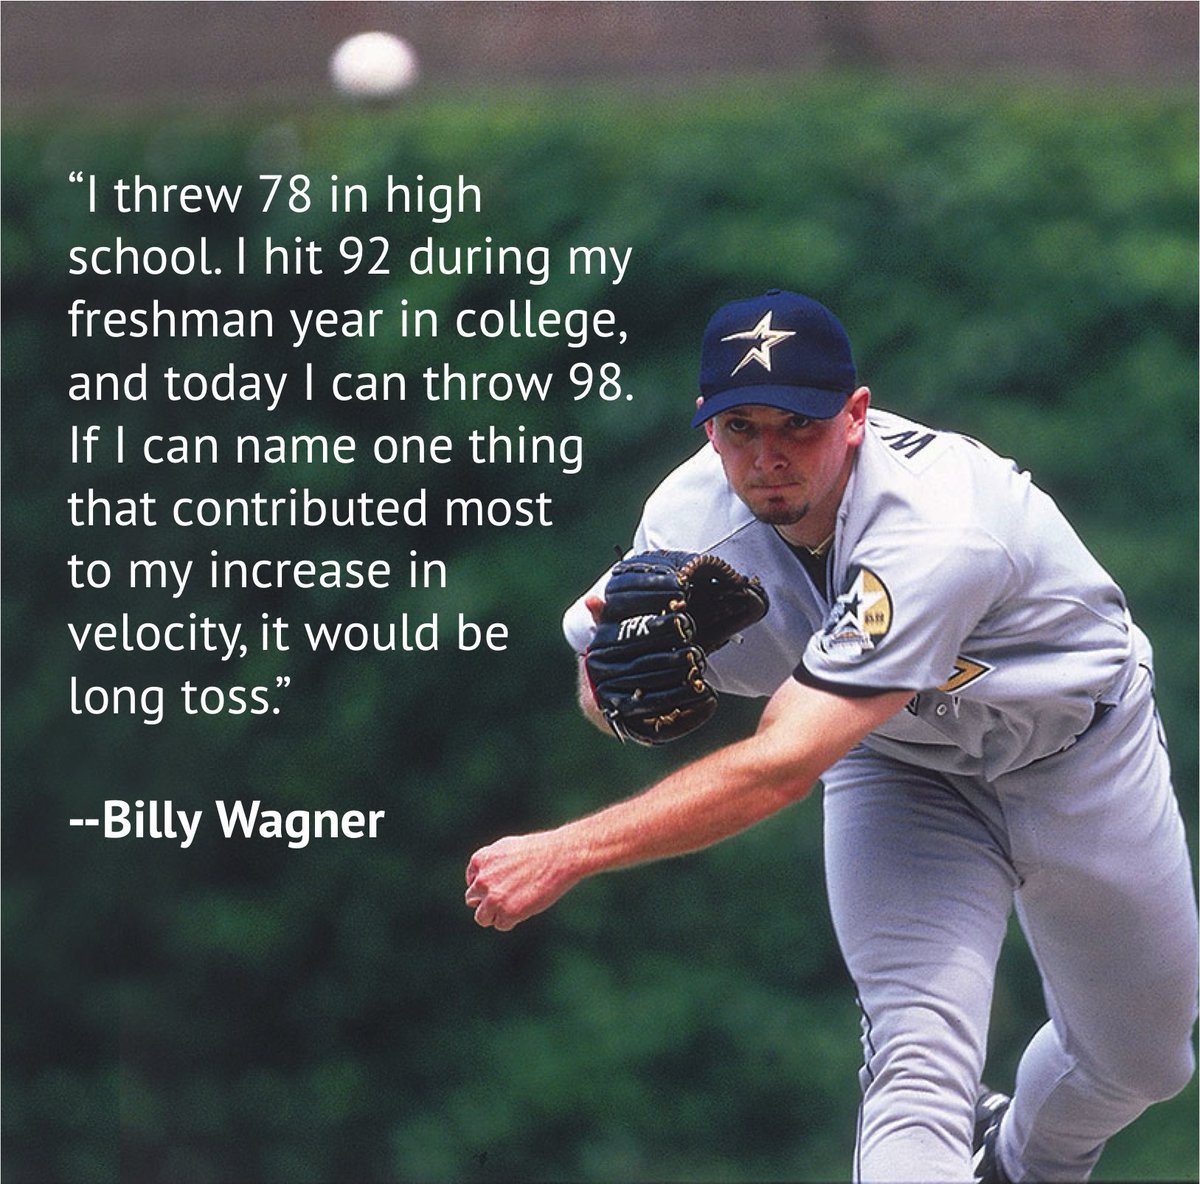 Billy Wagner on using long toss to gain velocity. Courtesy of @PitchingNinja Check out some of my thoughts on the pros and cons of long toss below. 🧵